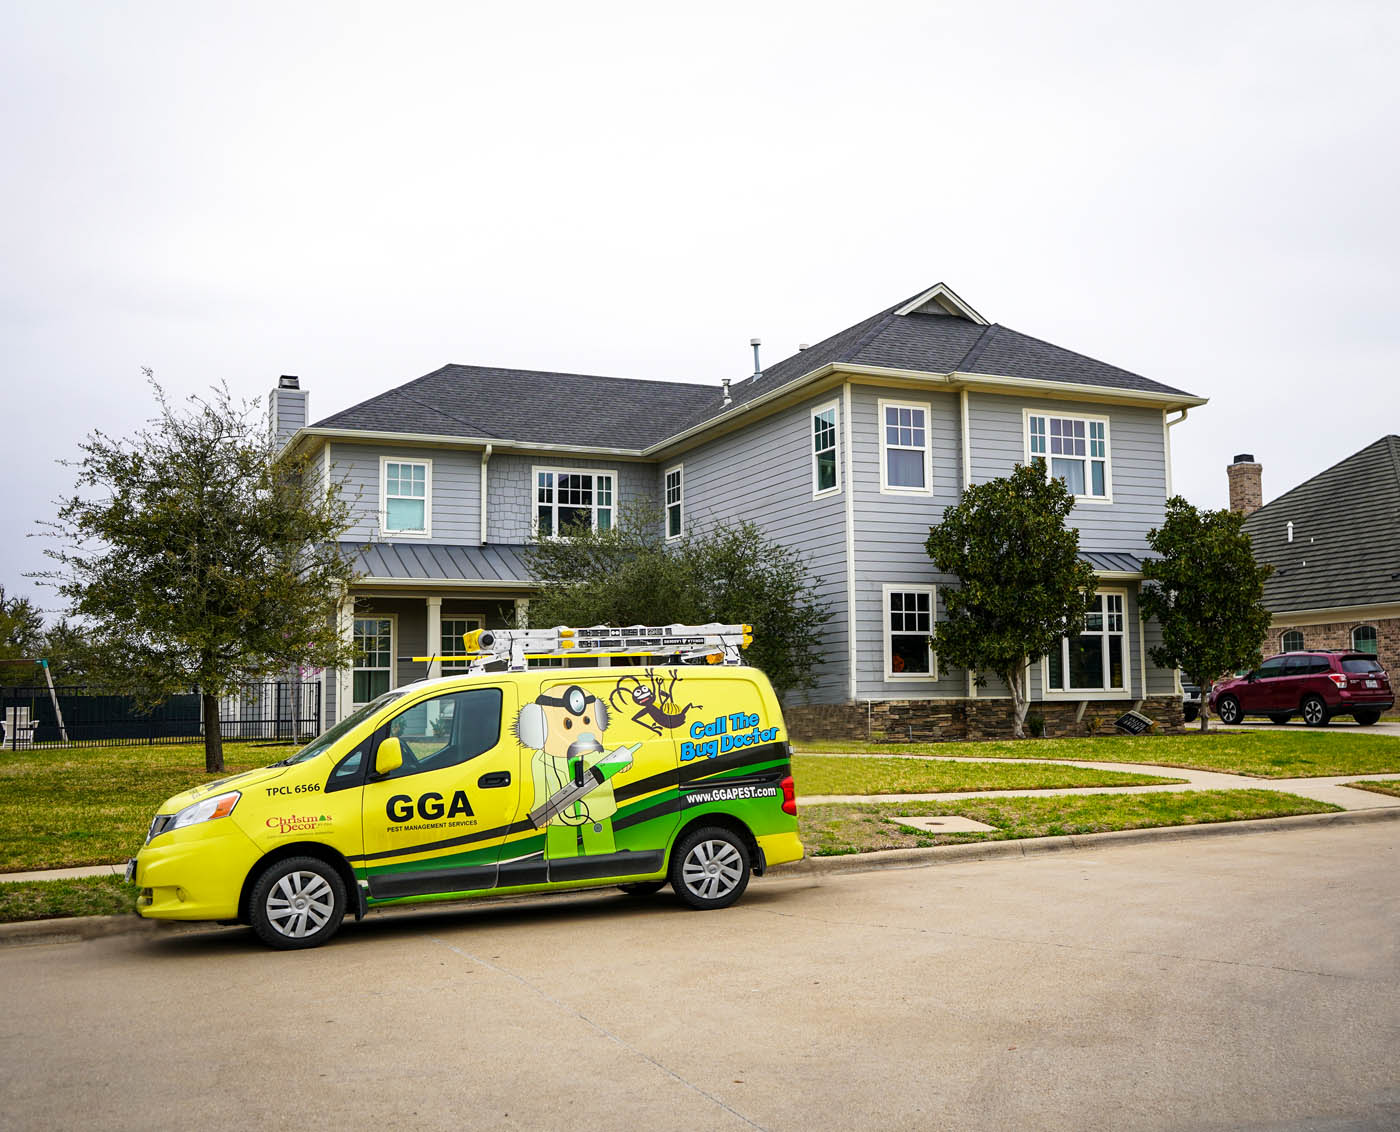 A GGA Pest Management vehicle in front of a residential home - learn how we can help with our roach exterminator services in Waco, TX.